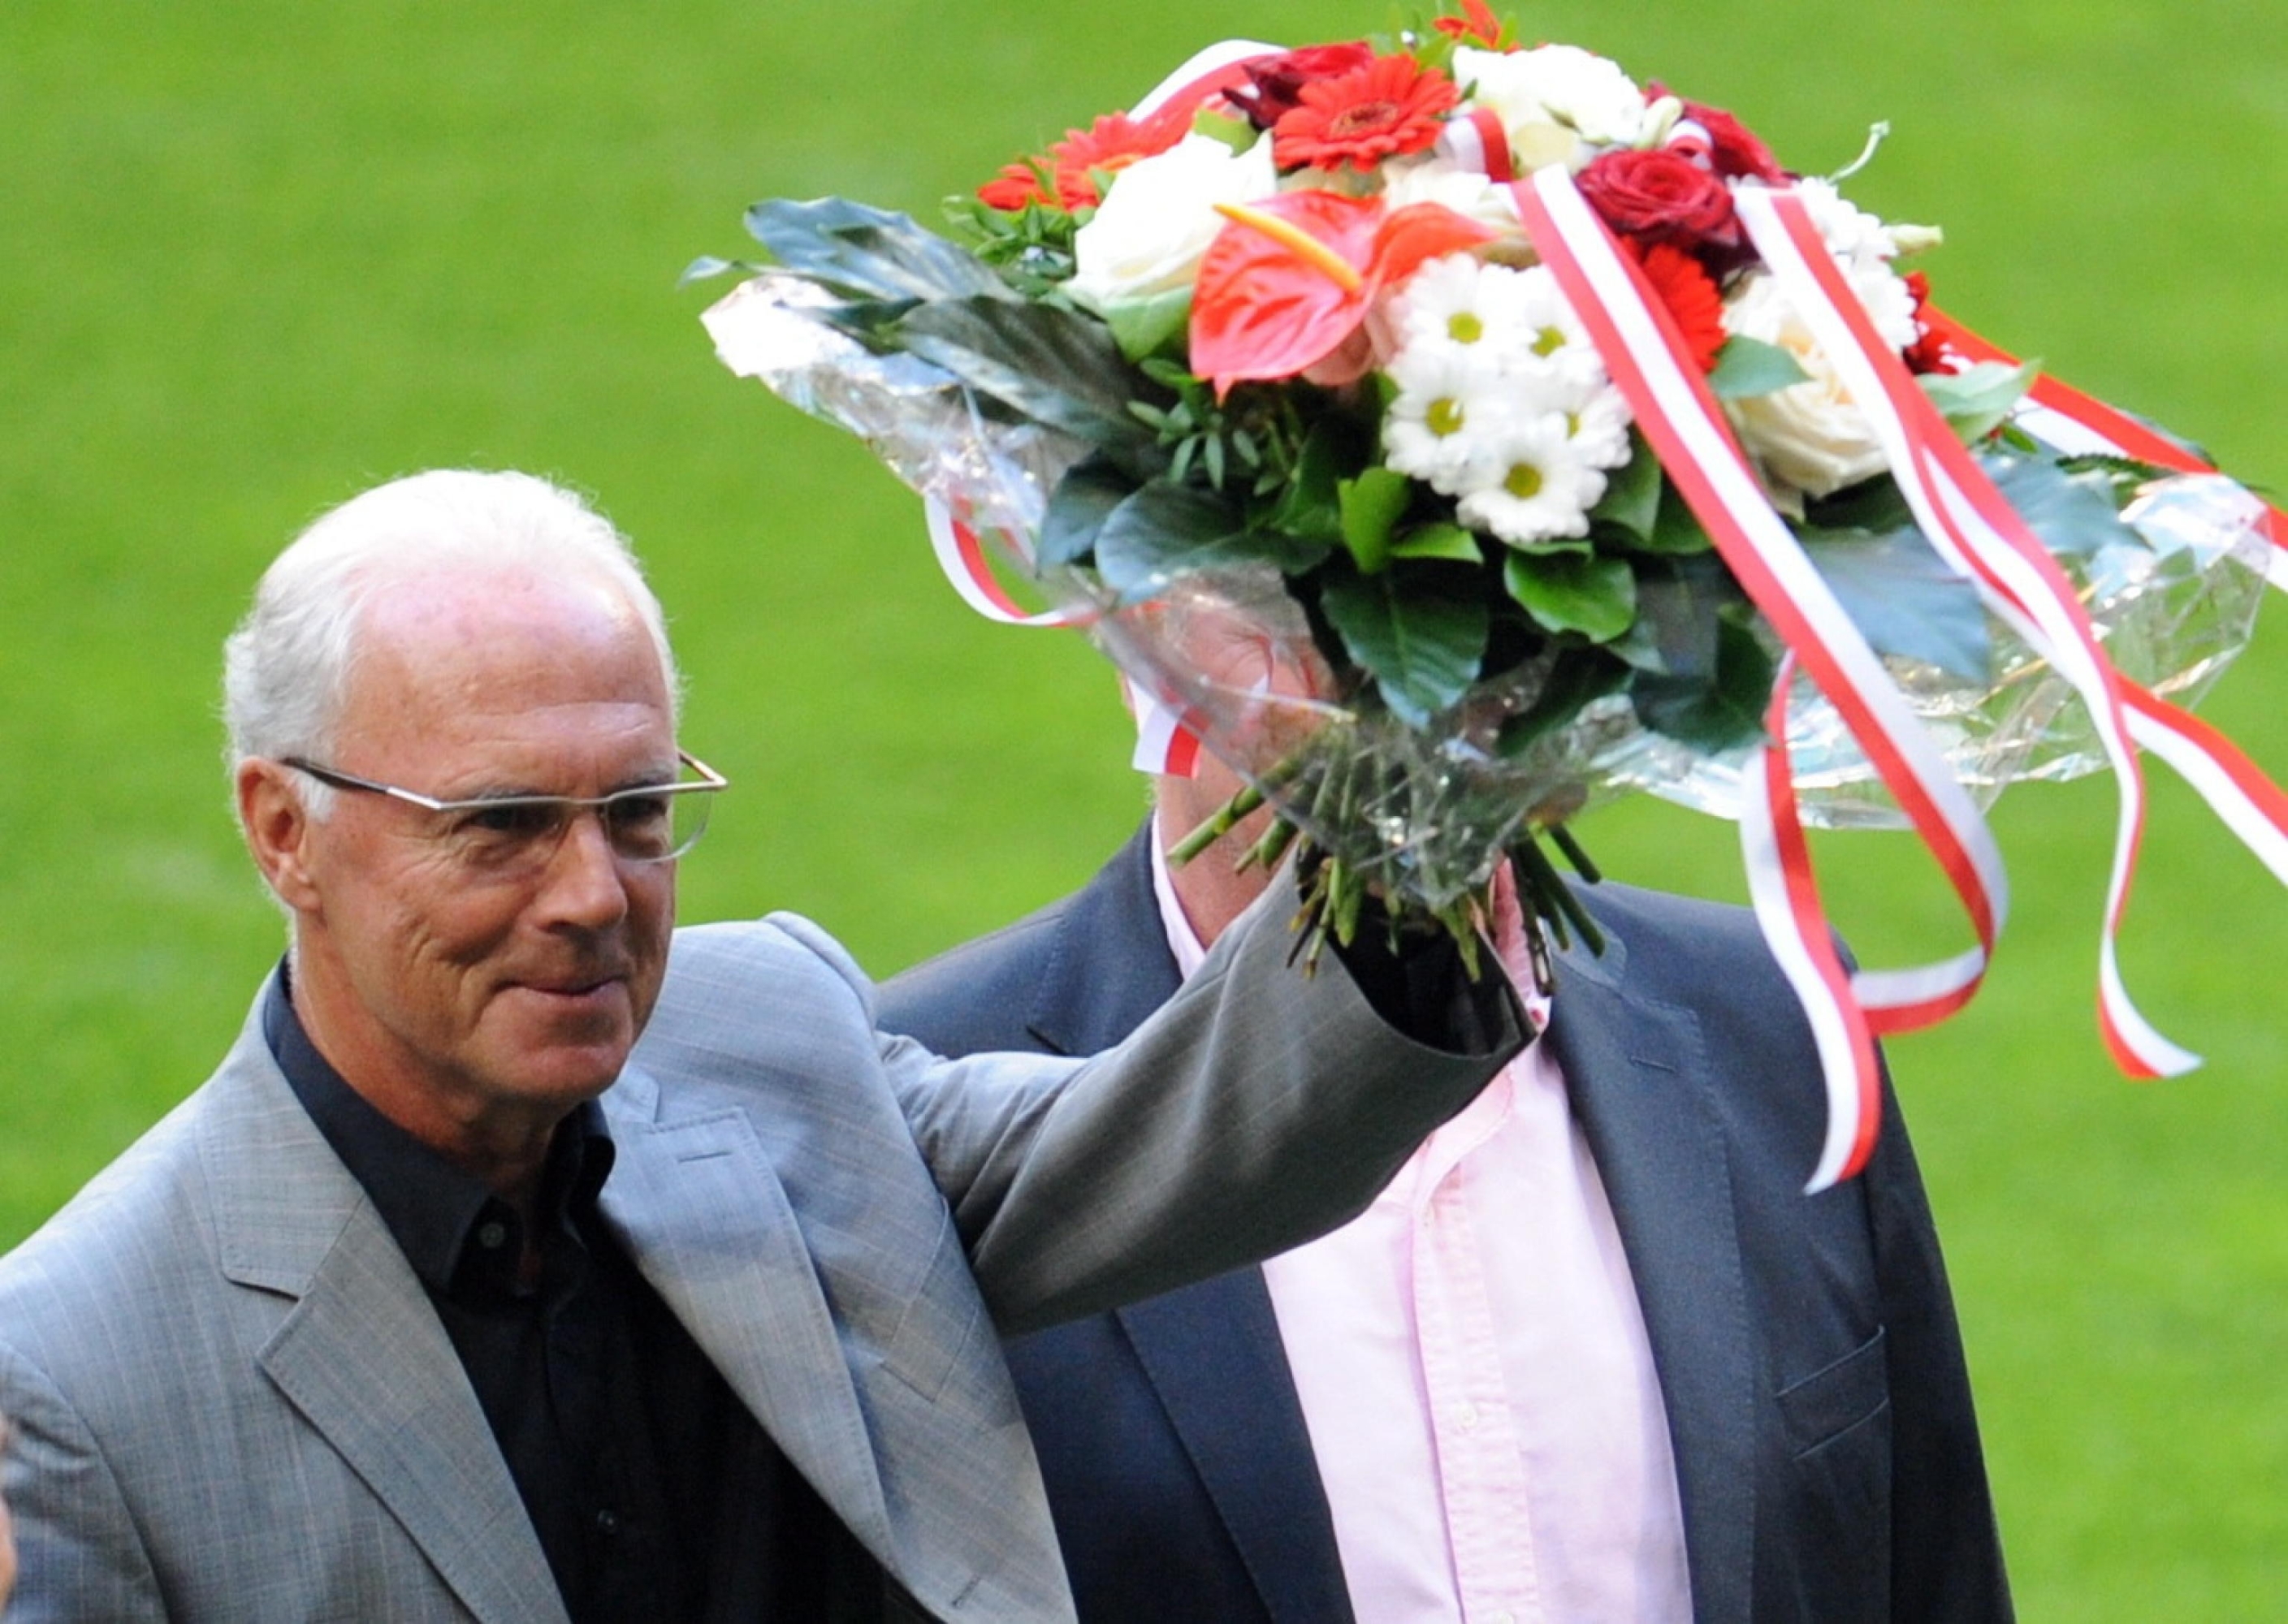 epa11064736 (FILE) A file picture of former German soccer player and coach, Franz Beckenbauer, waving  a flower bouquet on his 65th Birthday before the German Bundeliga match Bayern Munich vs. Werder Bremen in the Allianz arena in Munich, Germany, 11 September 2010, re-issued 08 January 2024. Beckenbauer passed away on 07 January 2024 aged 78, as his family confirmed on 08 January.  EPA/TOBIAS HASE  GERMANY OUT *** Local Caption *** 02329300